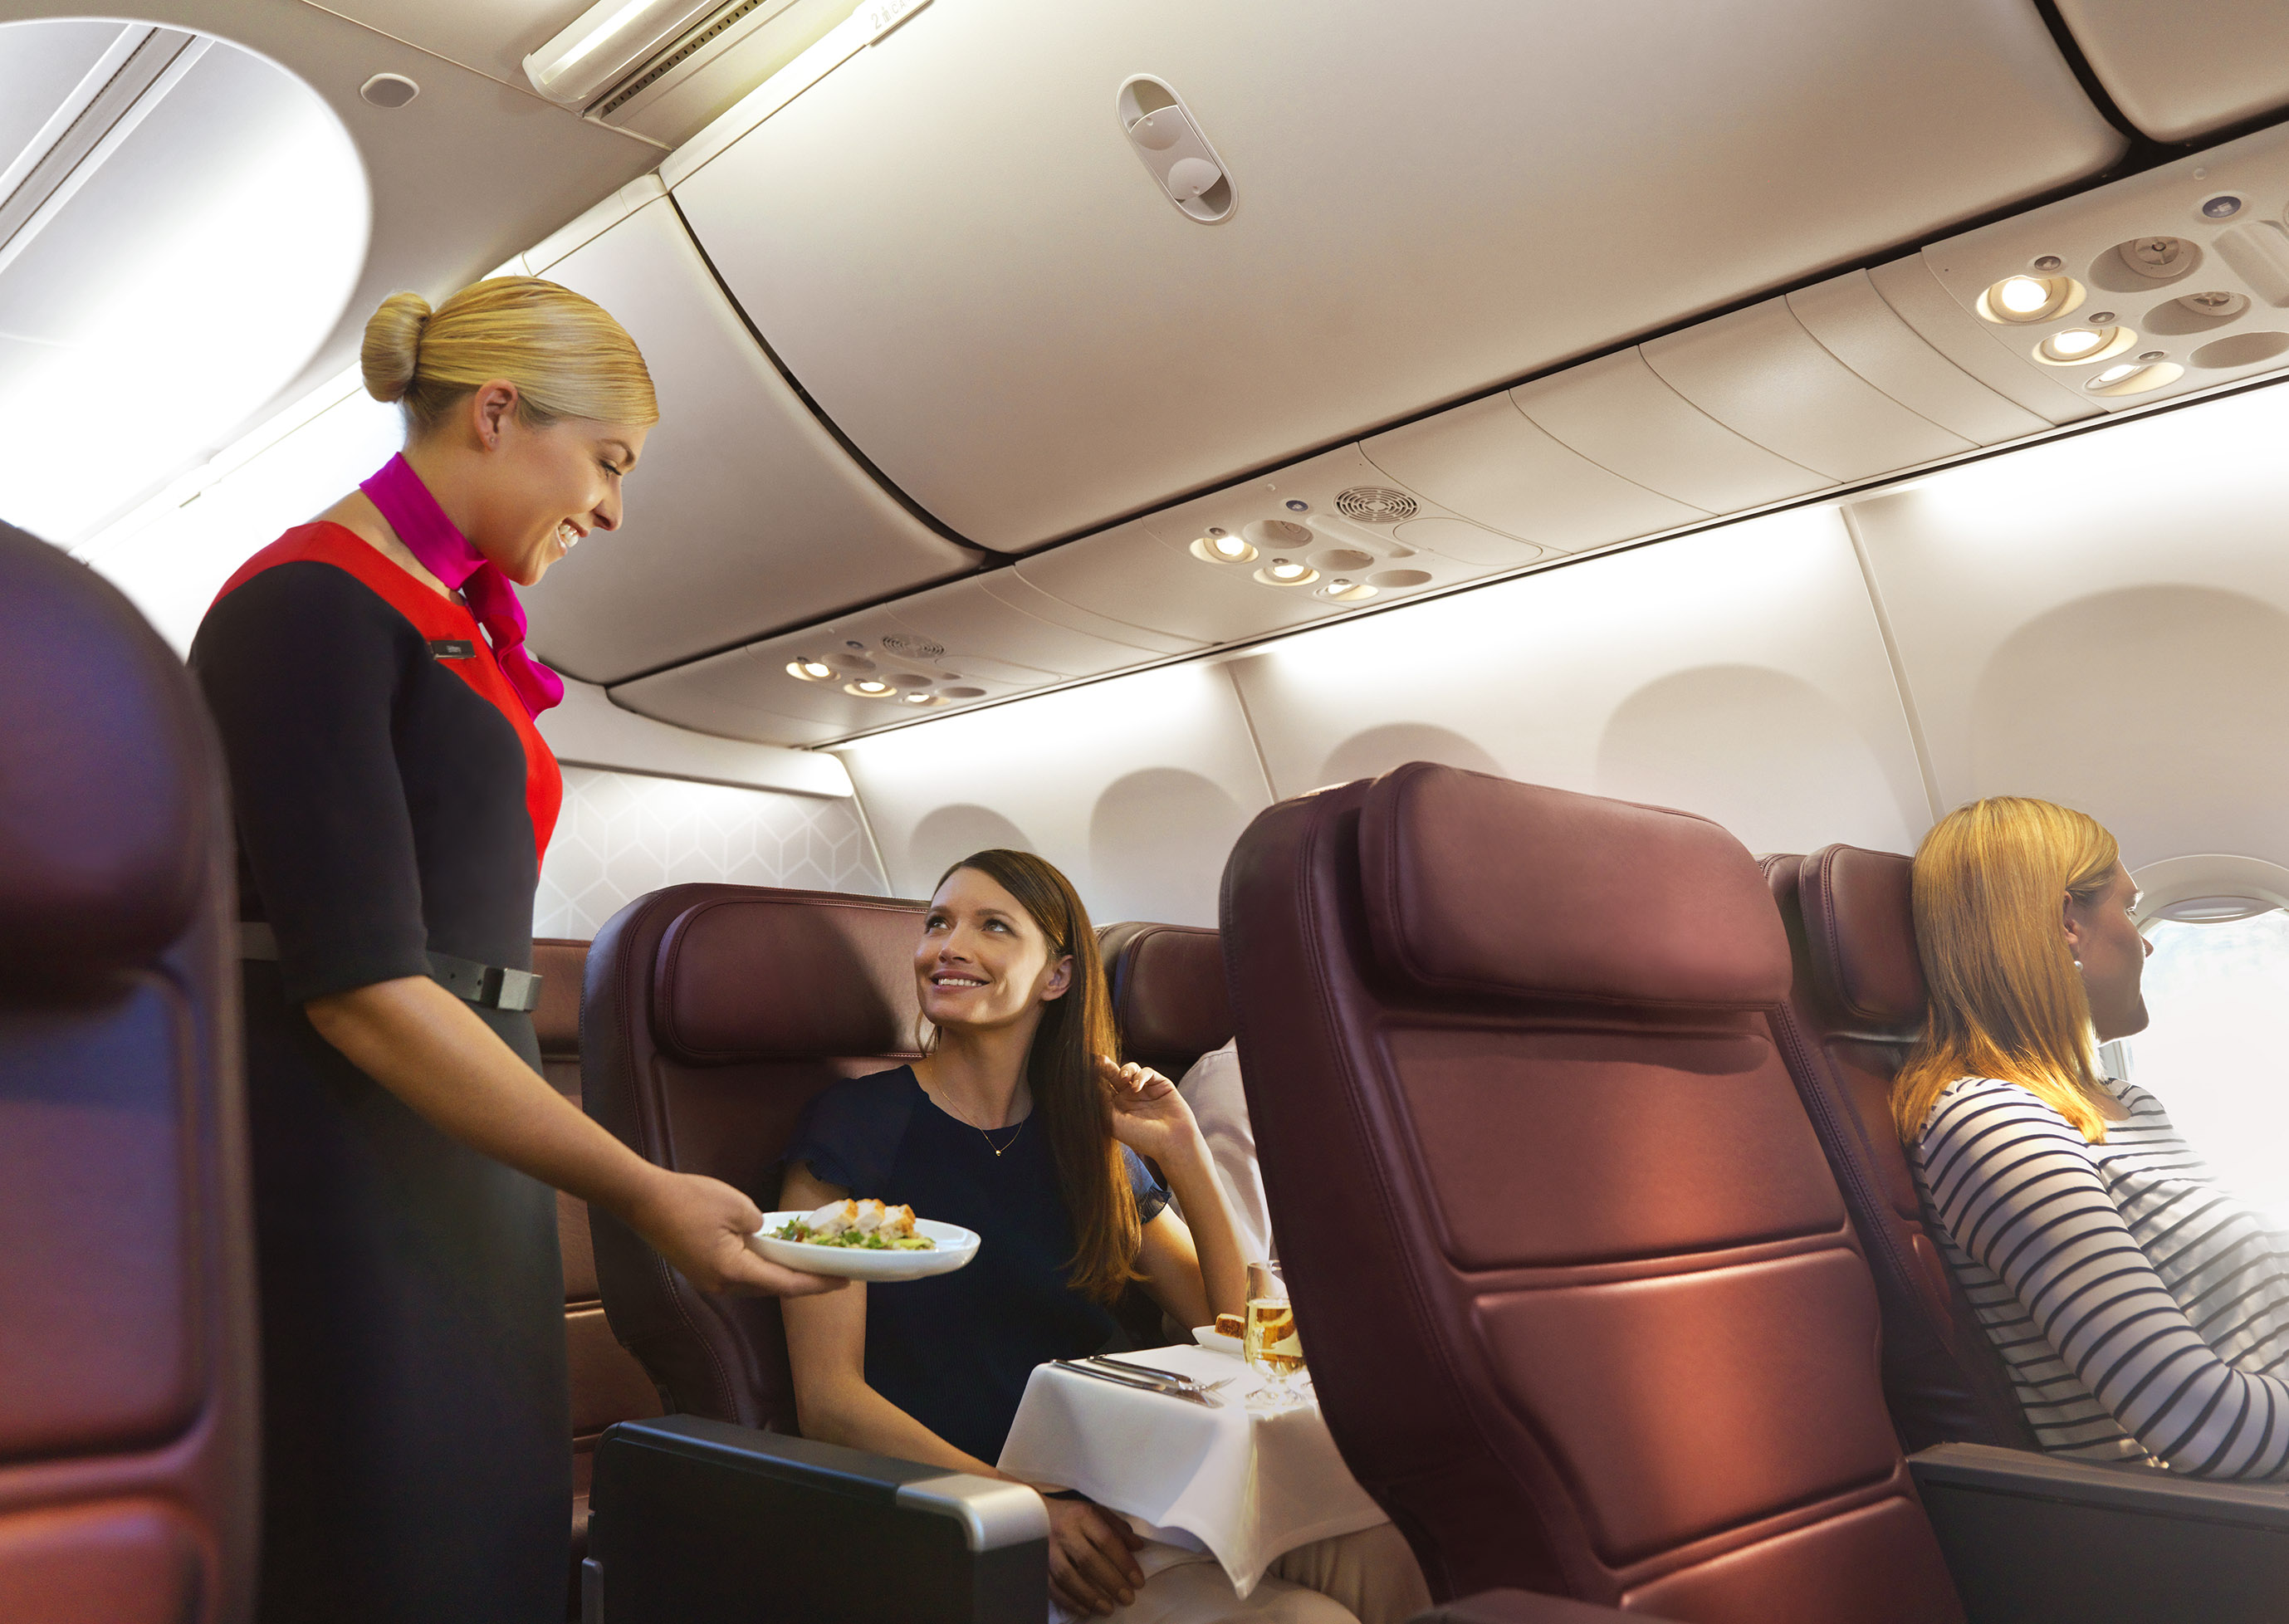 a woman serving food to a group of women in an airplane